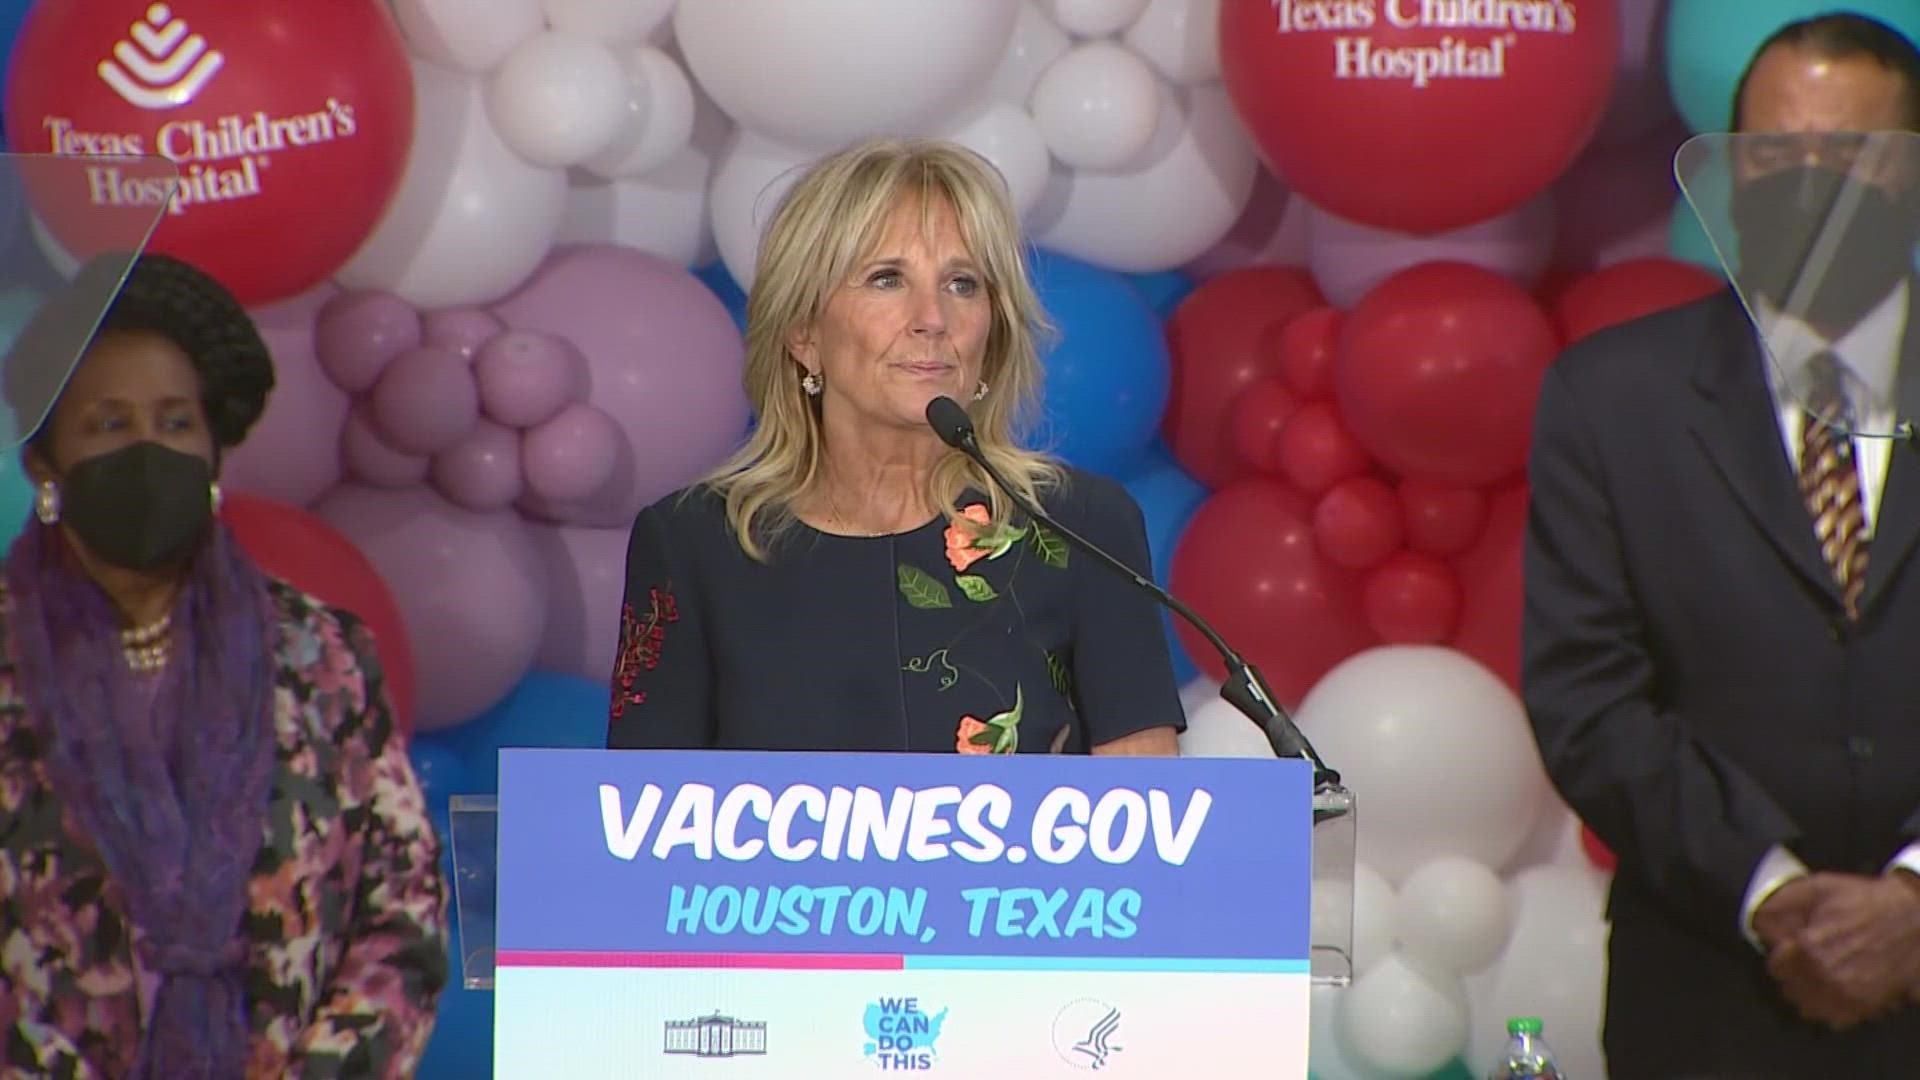 Dr. Biden visited Houston’s Texas Children’s Hospital as part of a national campaign to encourage parents to get their children vaccinated against COVID-19.